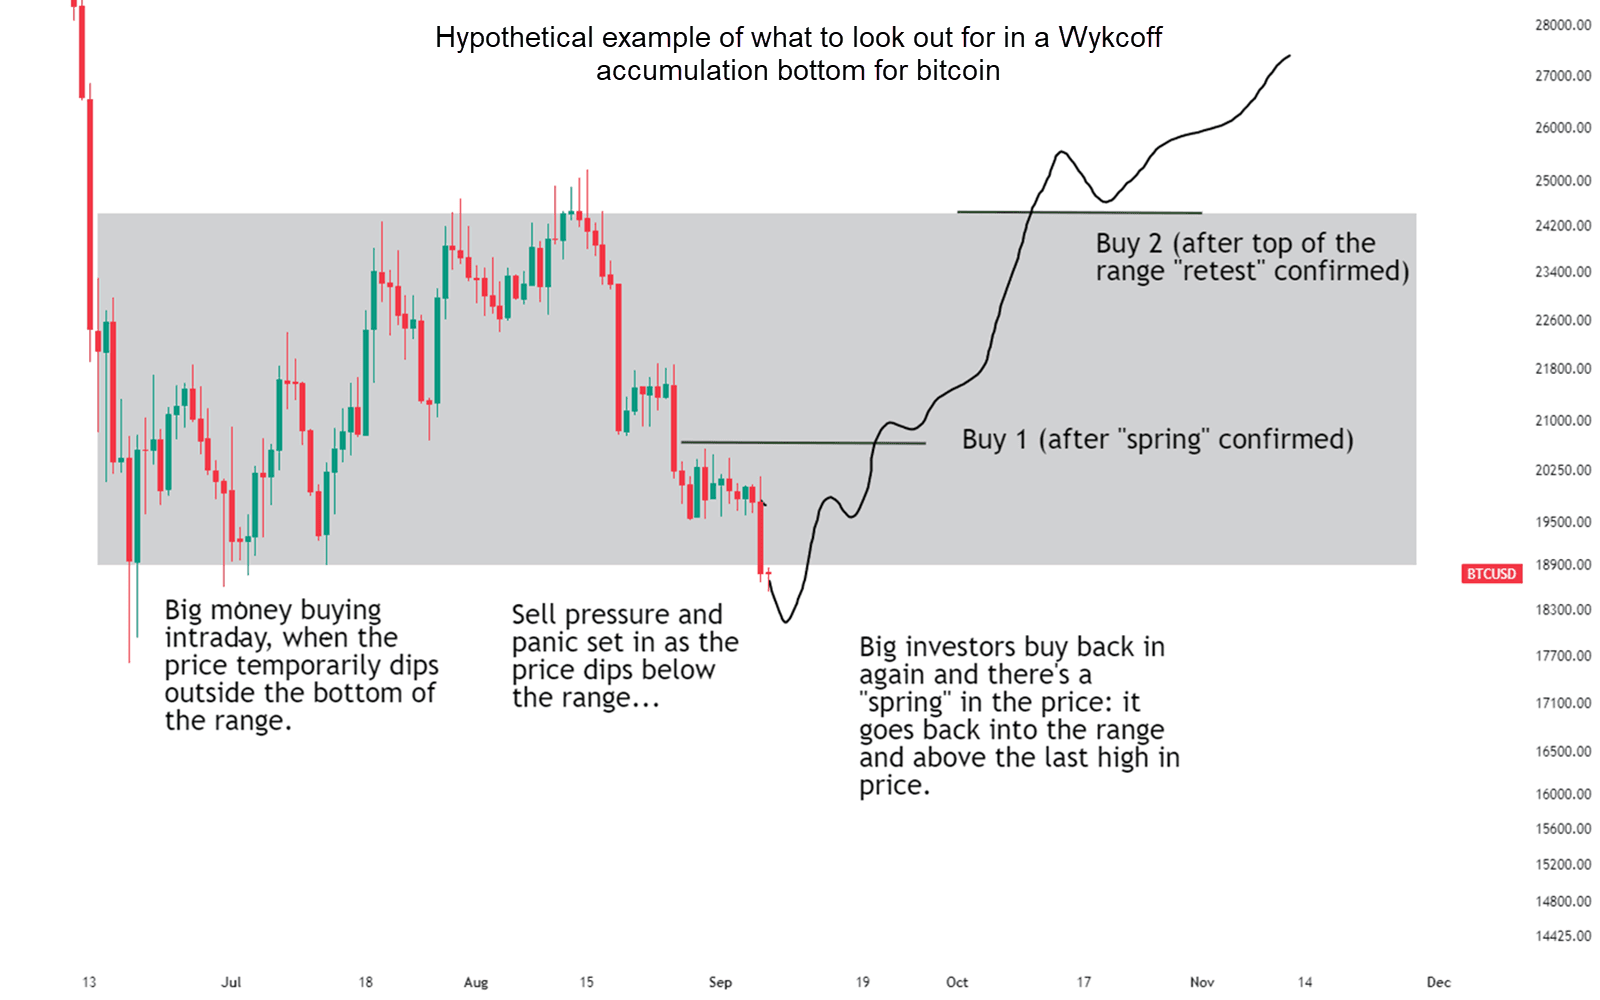 Hypothetical example of bitcoin in an accumulation pattern over the coming months. Chart drawn with TradingView.